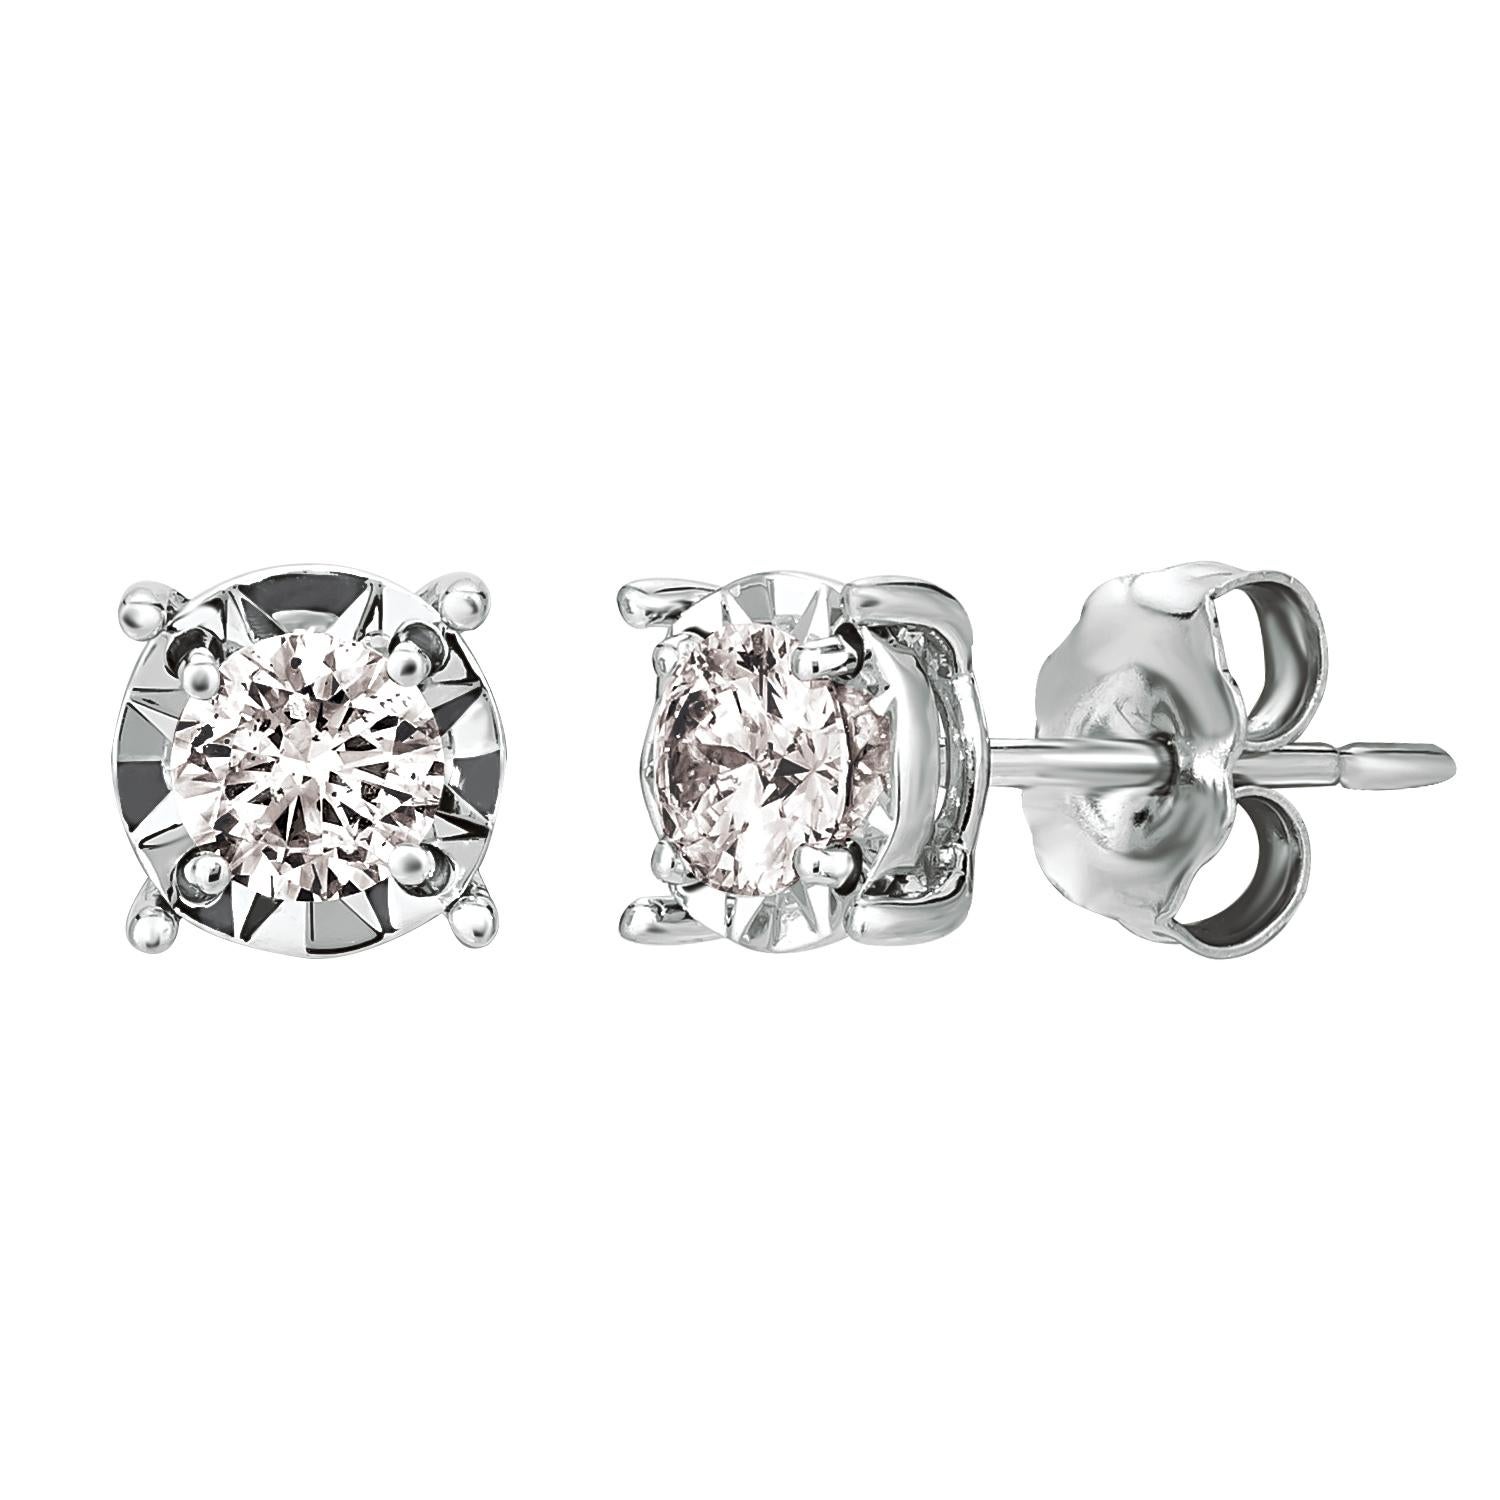 1.00 Carat Natural Diamond Illusion set Stud Earrings G SI 14K White Gold

100% Natural, Not Enhanced in any way Round Cut Diamond Earrings
1.00CT
G-H 
SI  
14K White Gold,  Prong set
5/16